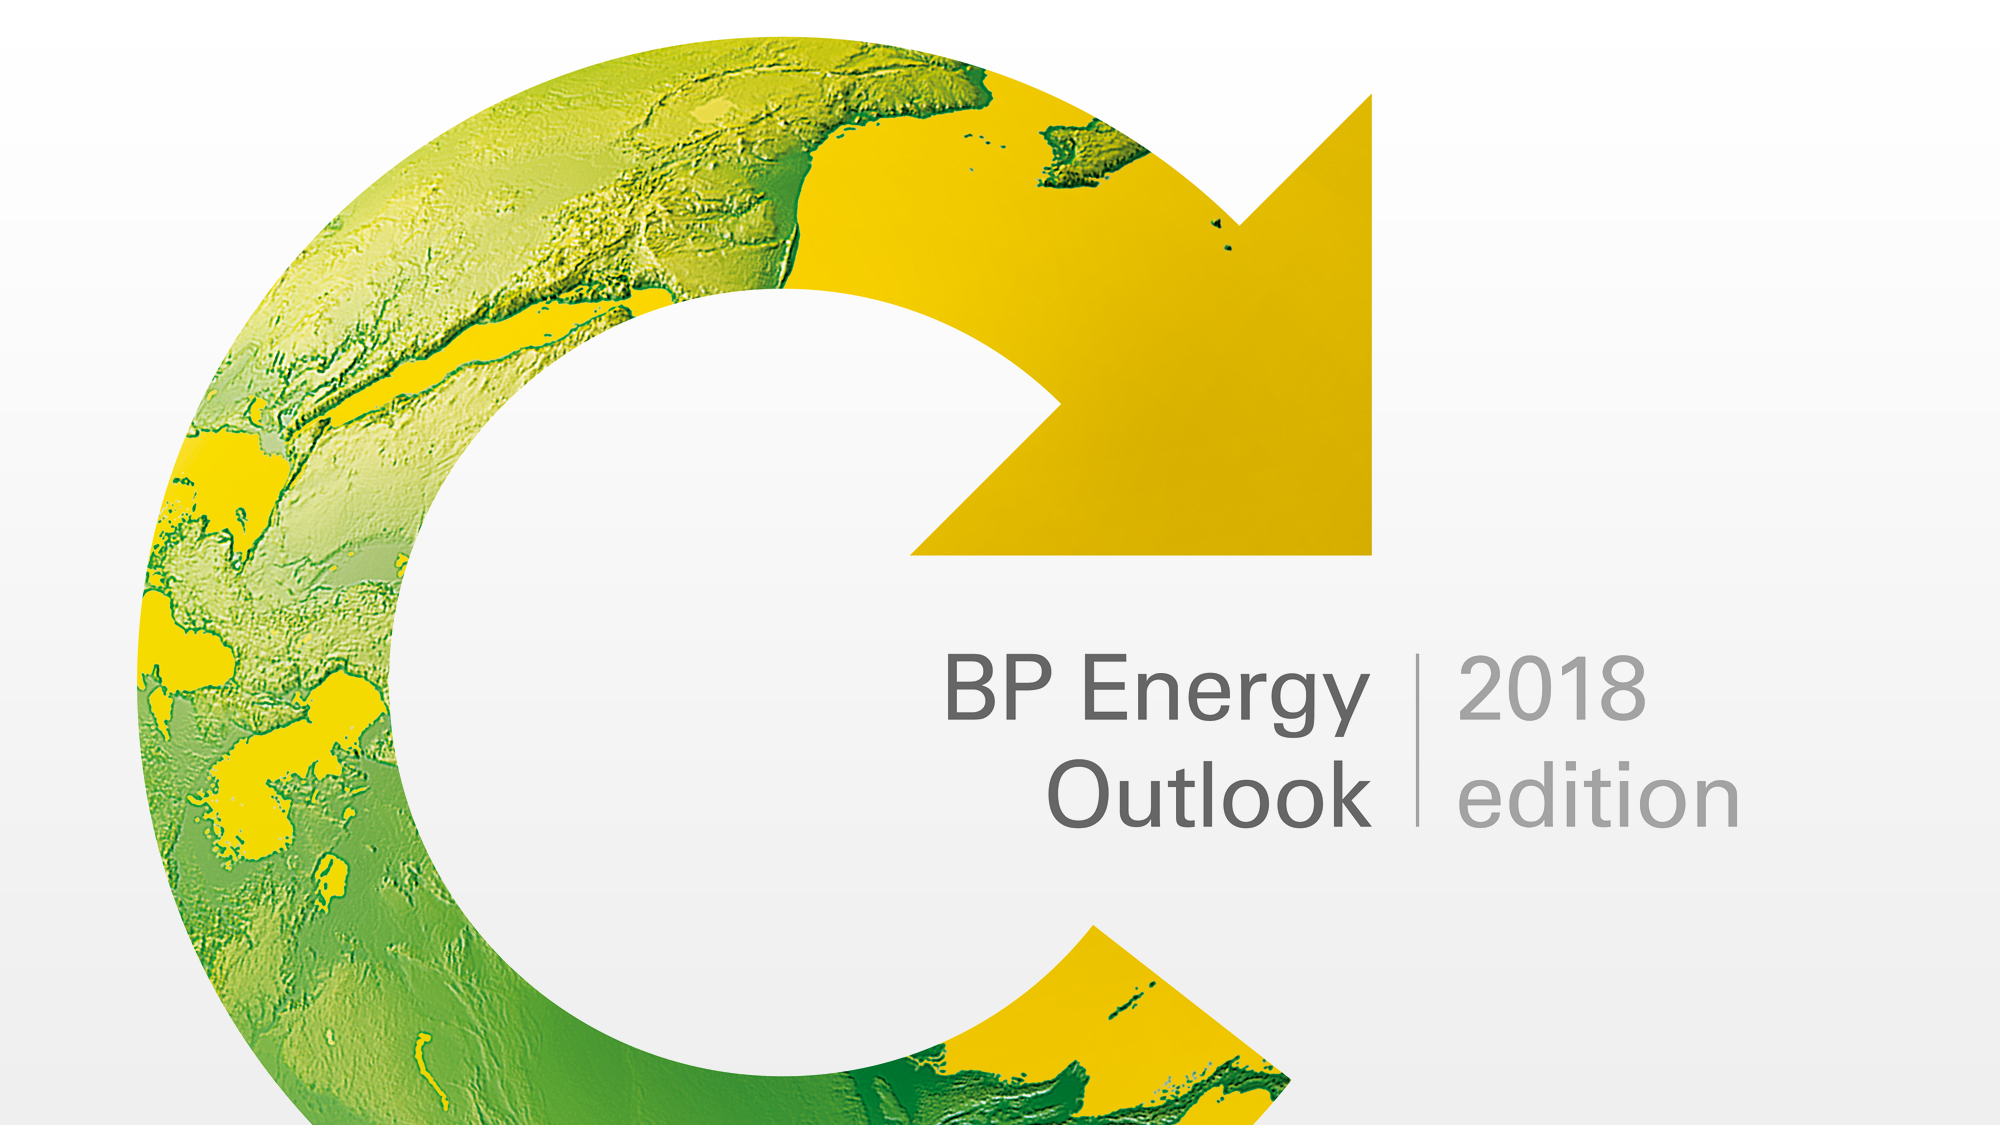 BP Energy Outlook Presented in Athens Special Event